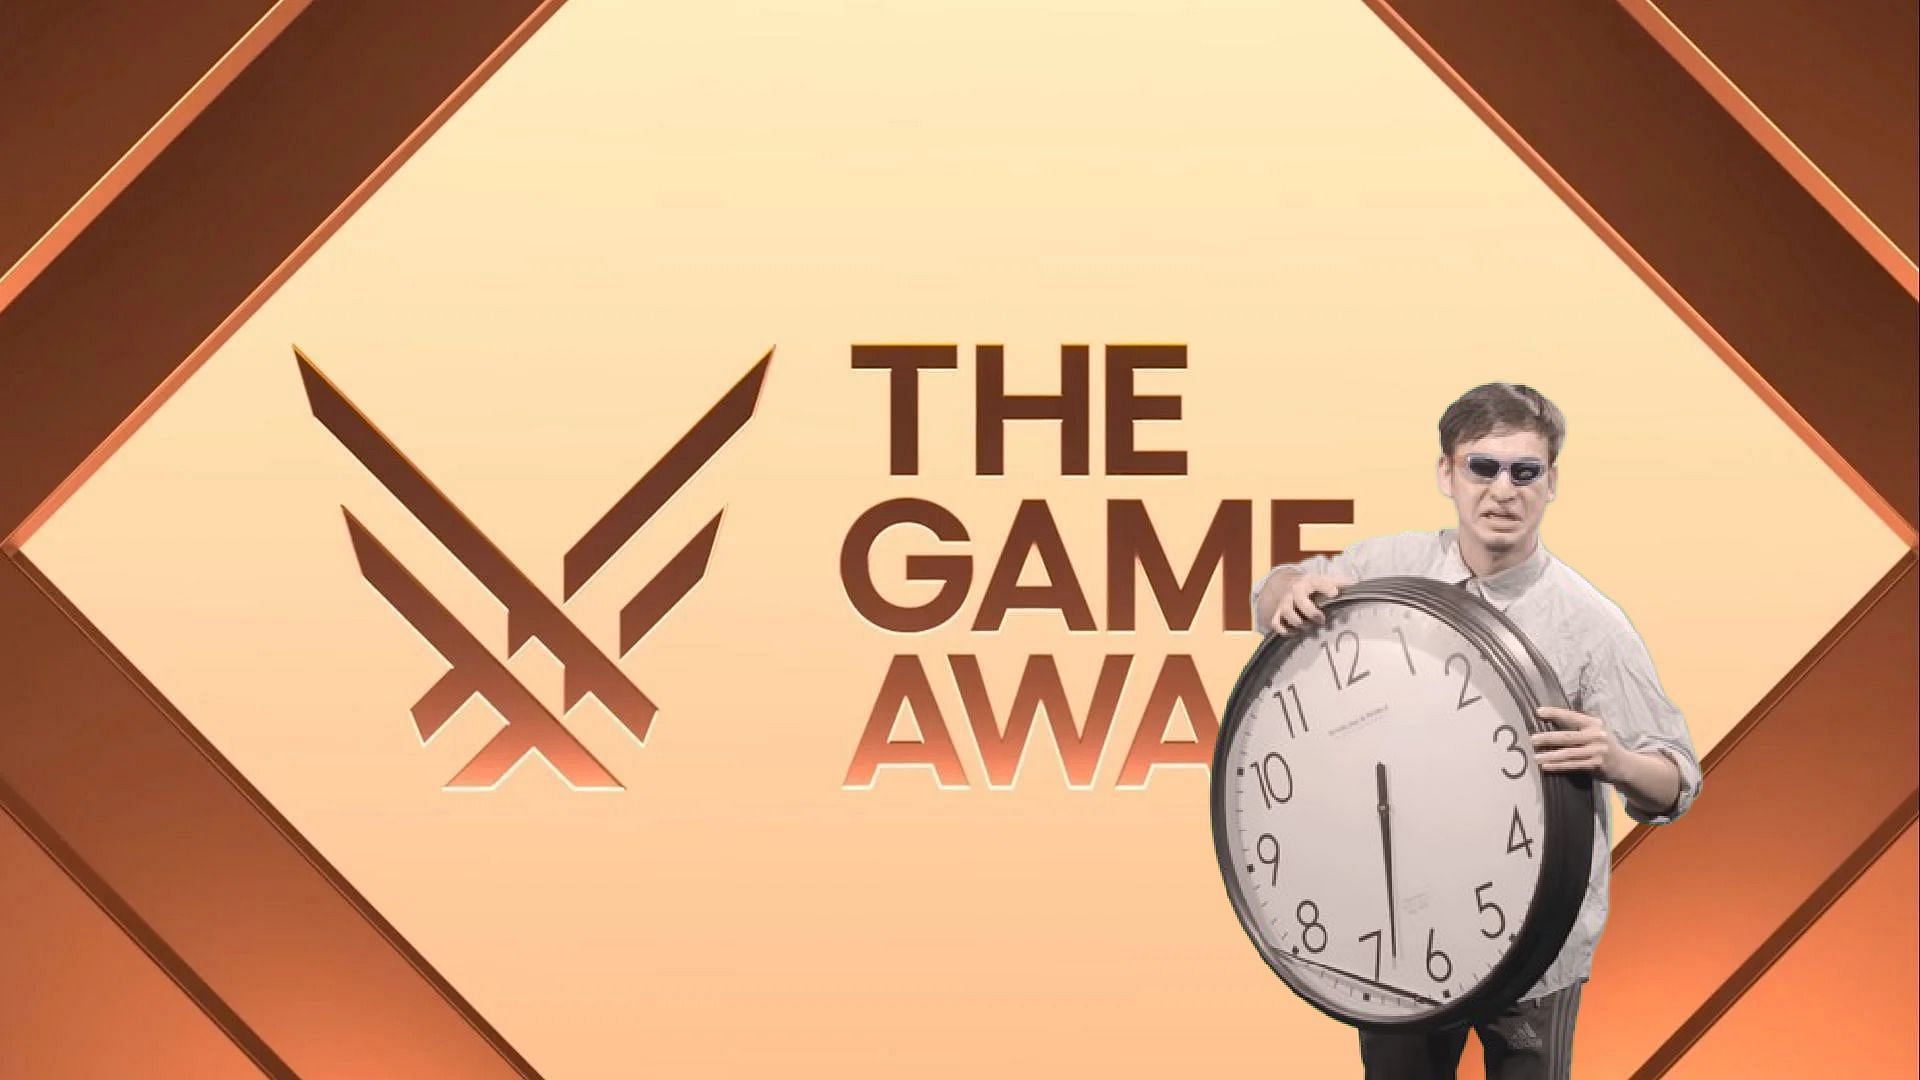 Game Awards Creator Reflects on 2018, Beyond as Viewer Numbers More Than  Double